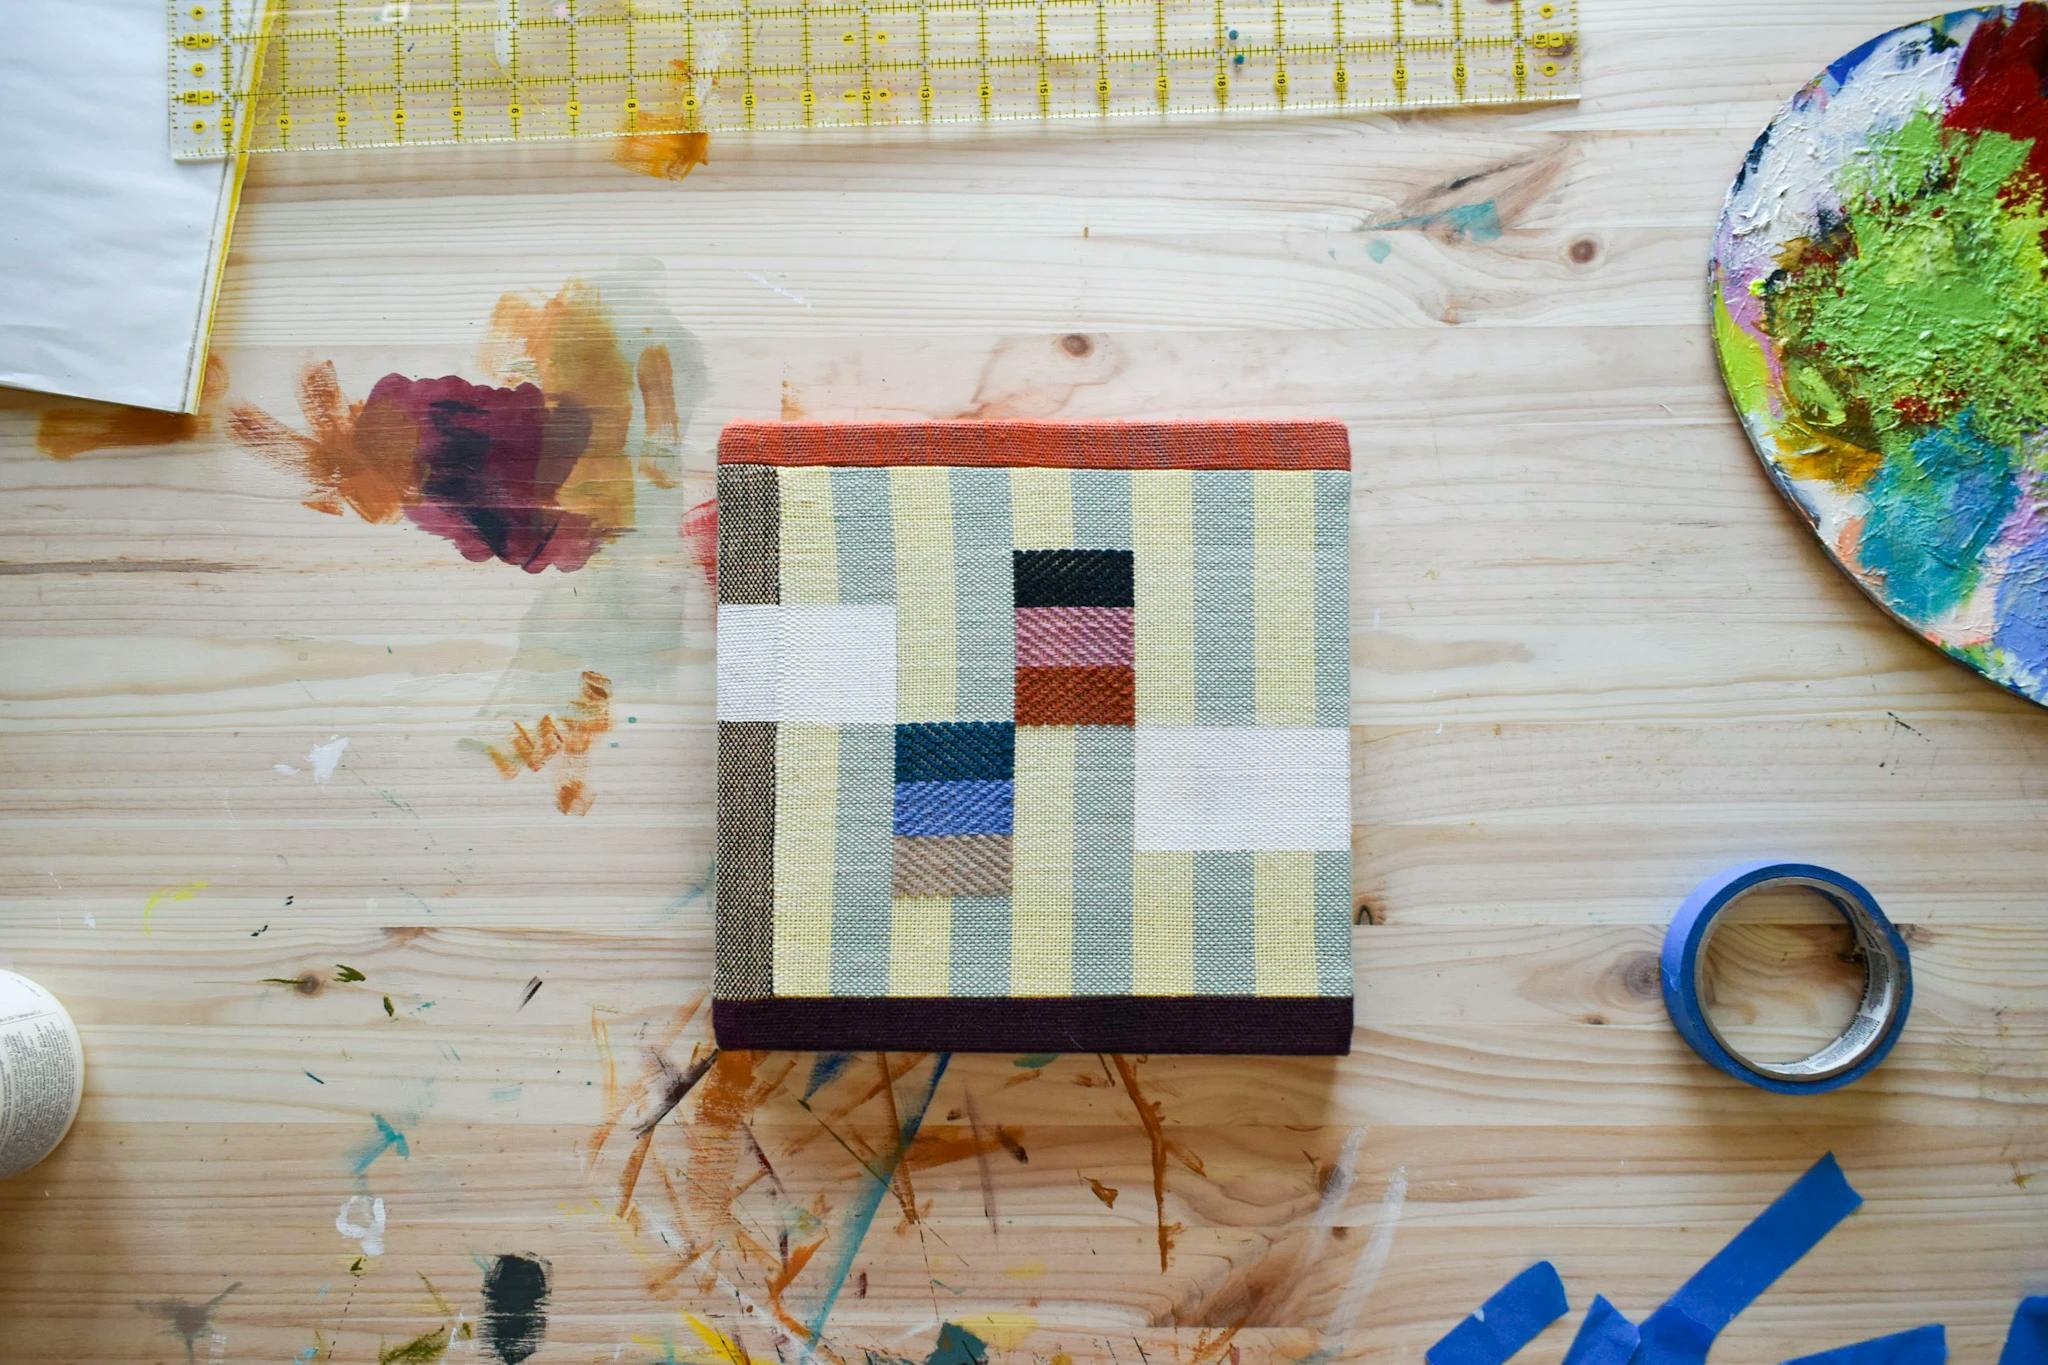 A small, striped acrylic painting on handwoven textiles by artist Sarah Sullivan Sherrod.